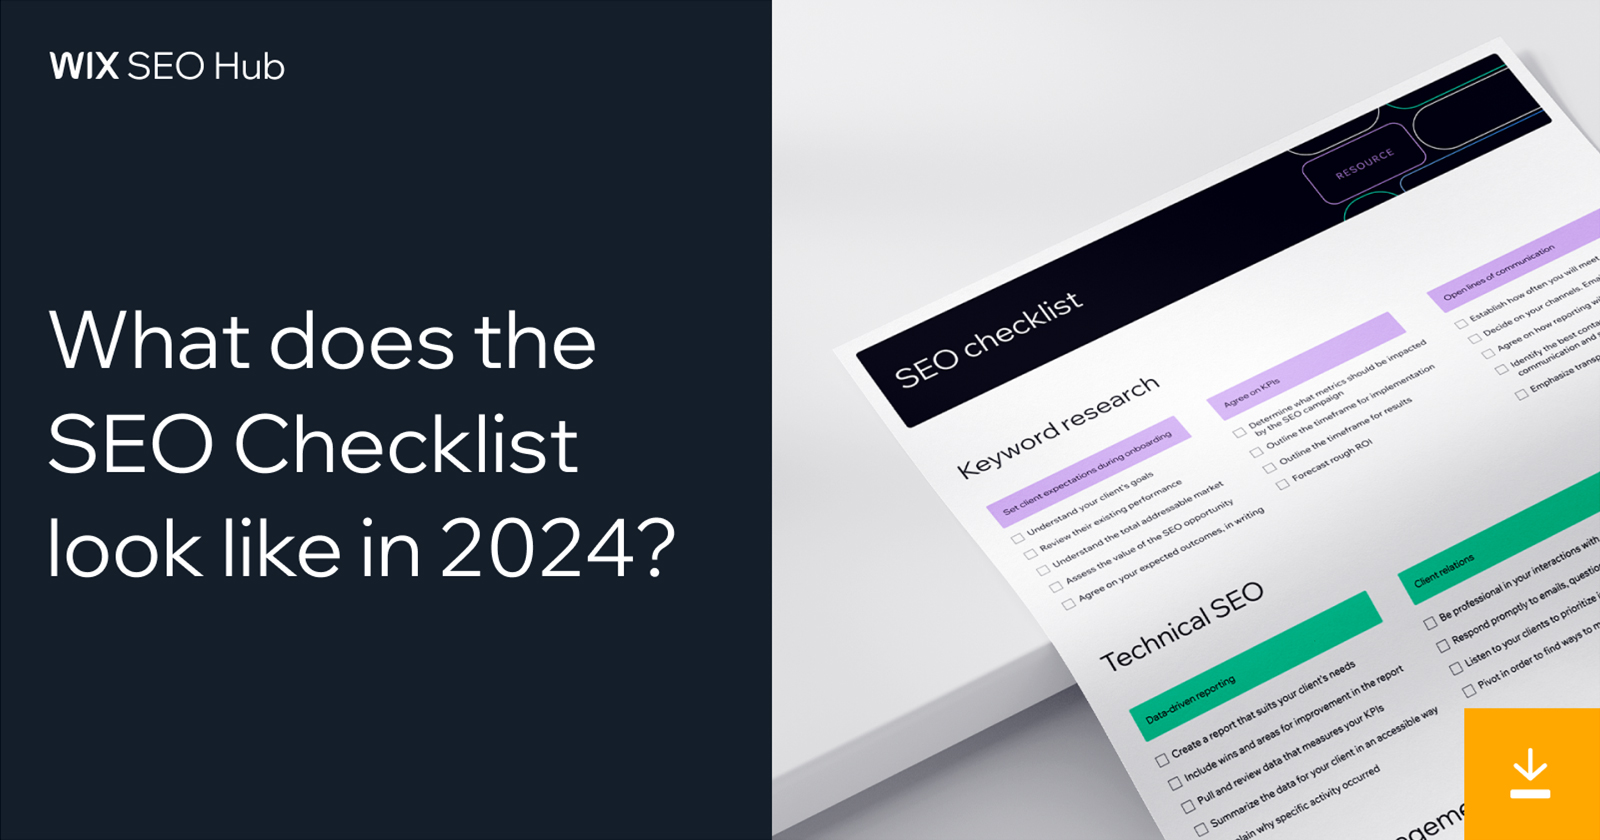 Top 3 SEO Checklists For On-Page & Technical SEO In 2024